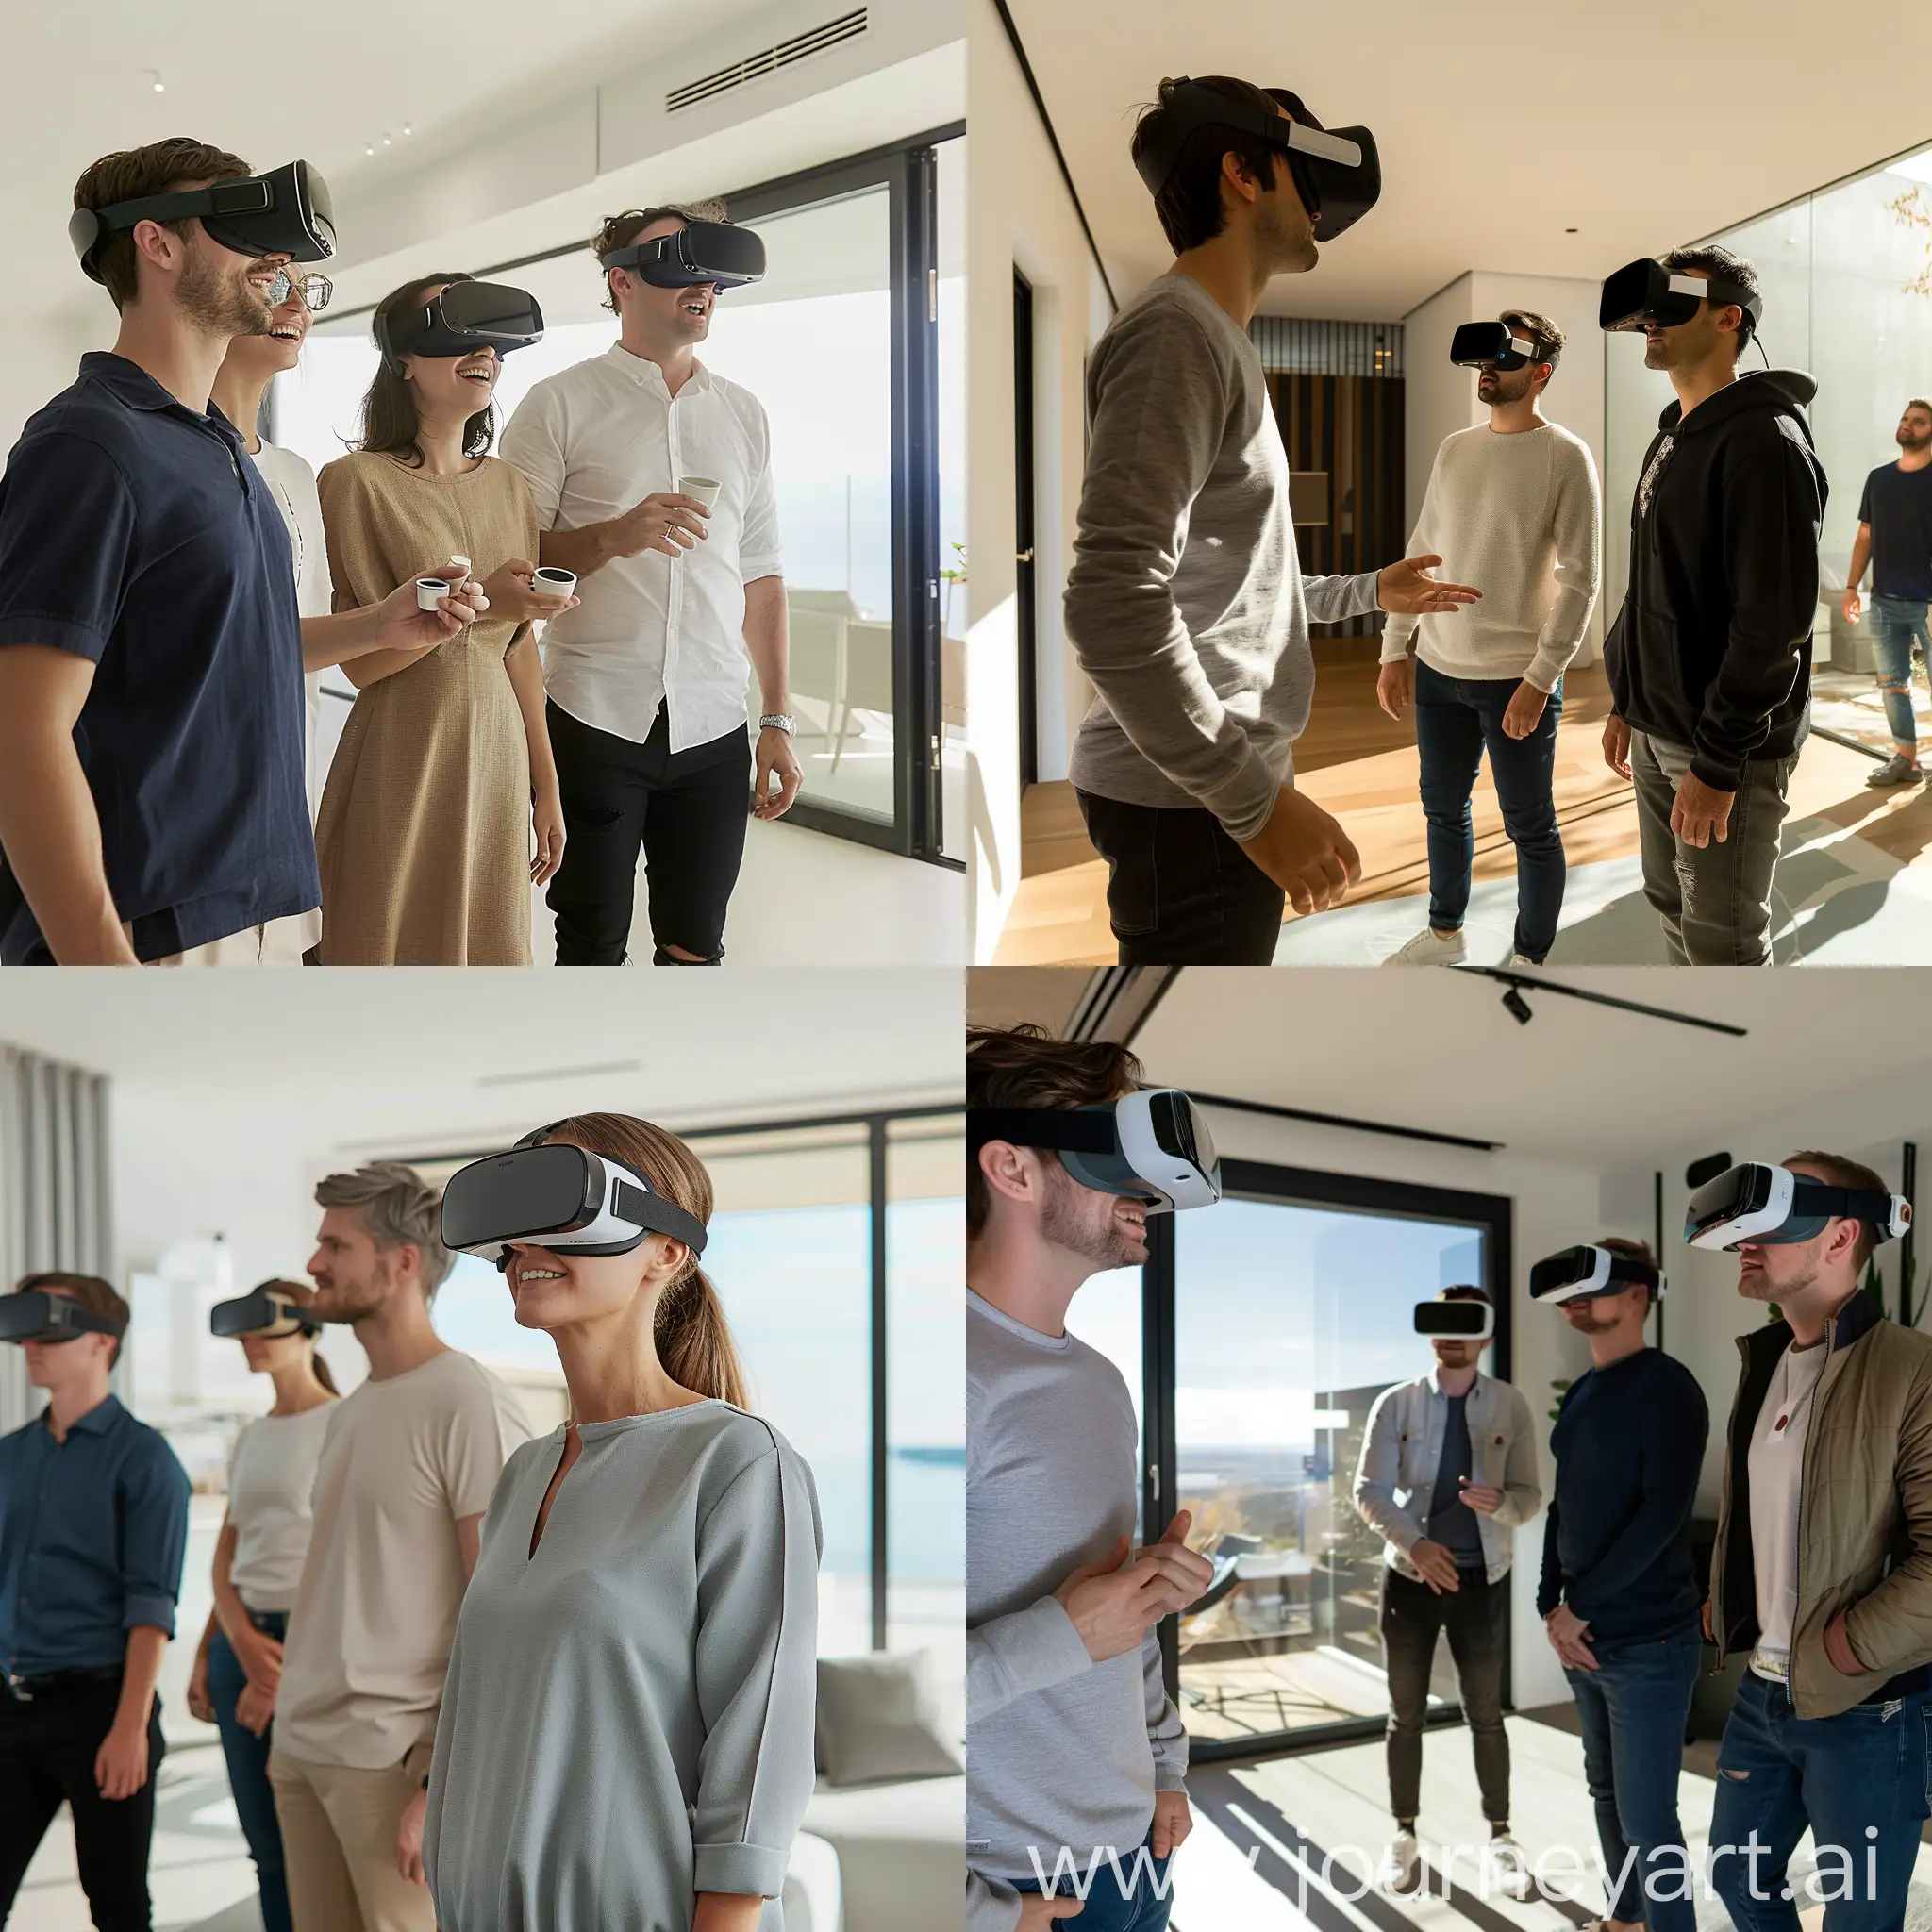 5 users on a Virtual reality real estate tour with a guide, photorealistic style